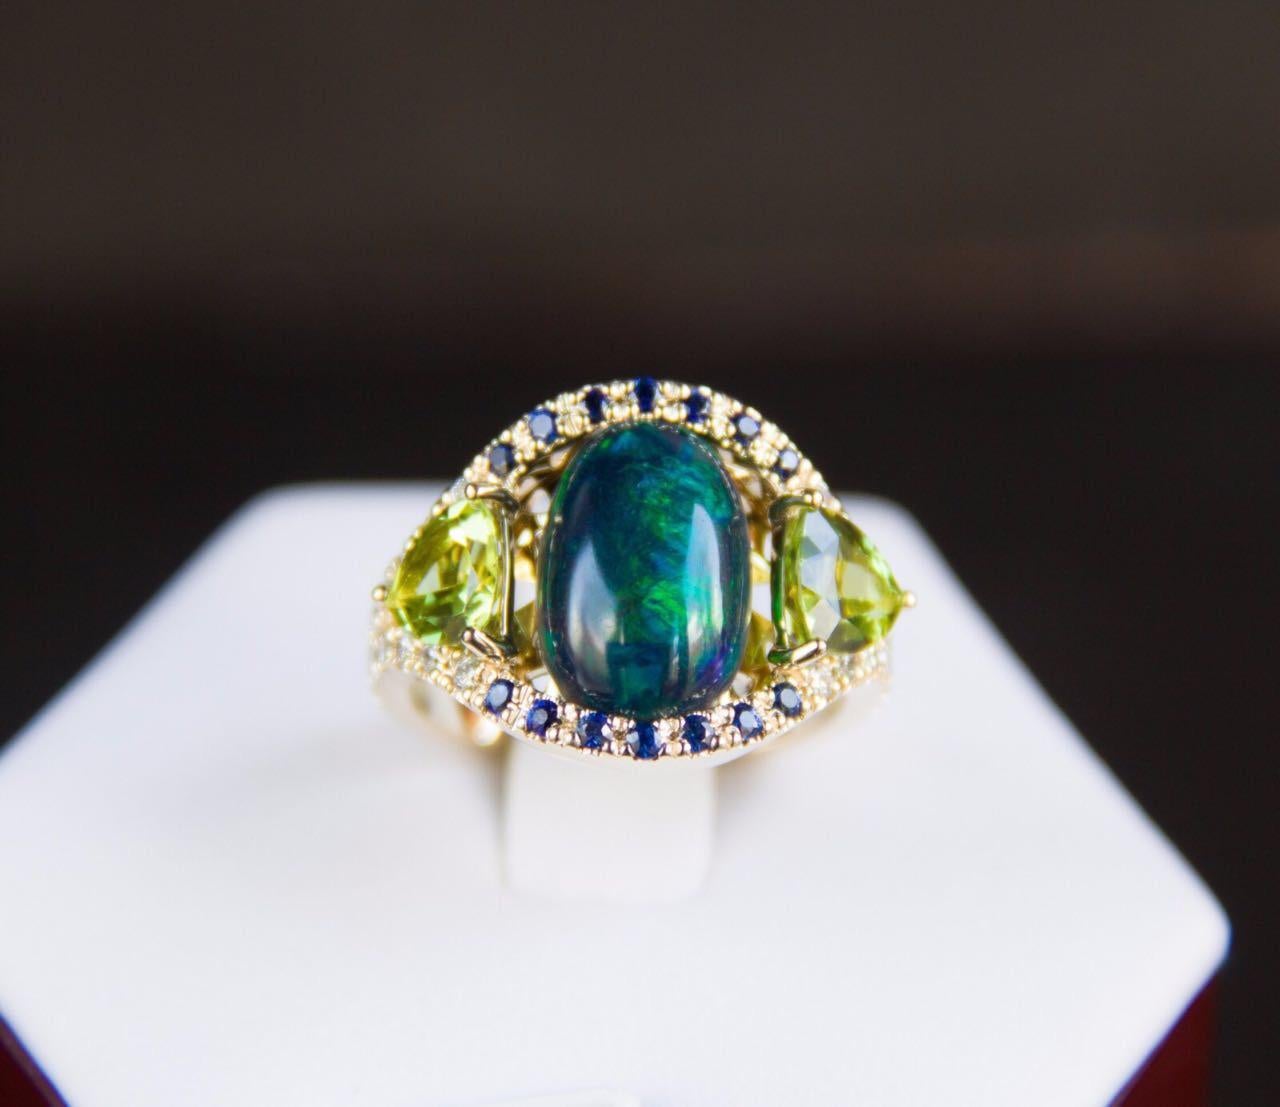 For Sale:  Black Opal, Sapphires, Peridots, Diamonds 14k Gold Ring, Genuine Opal Ring 4